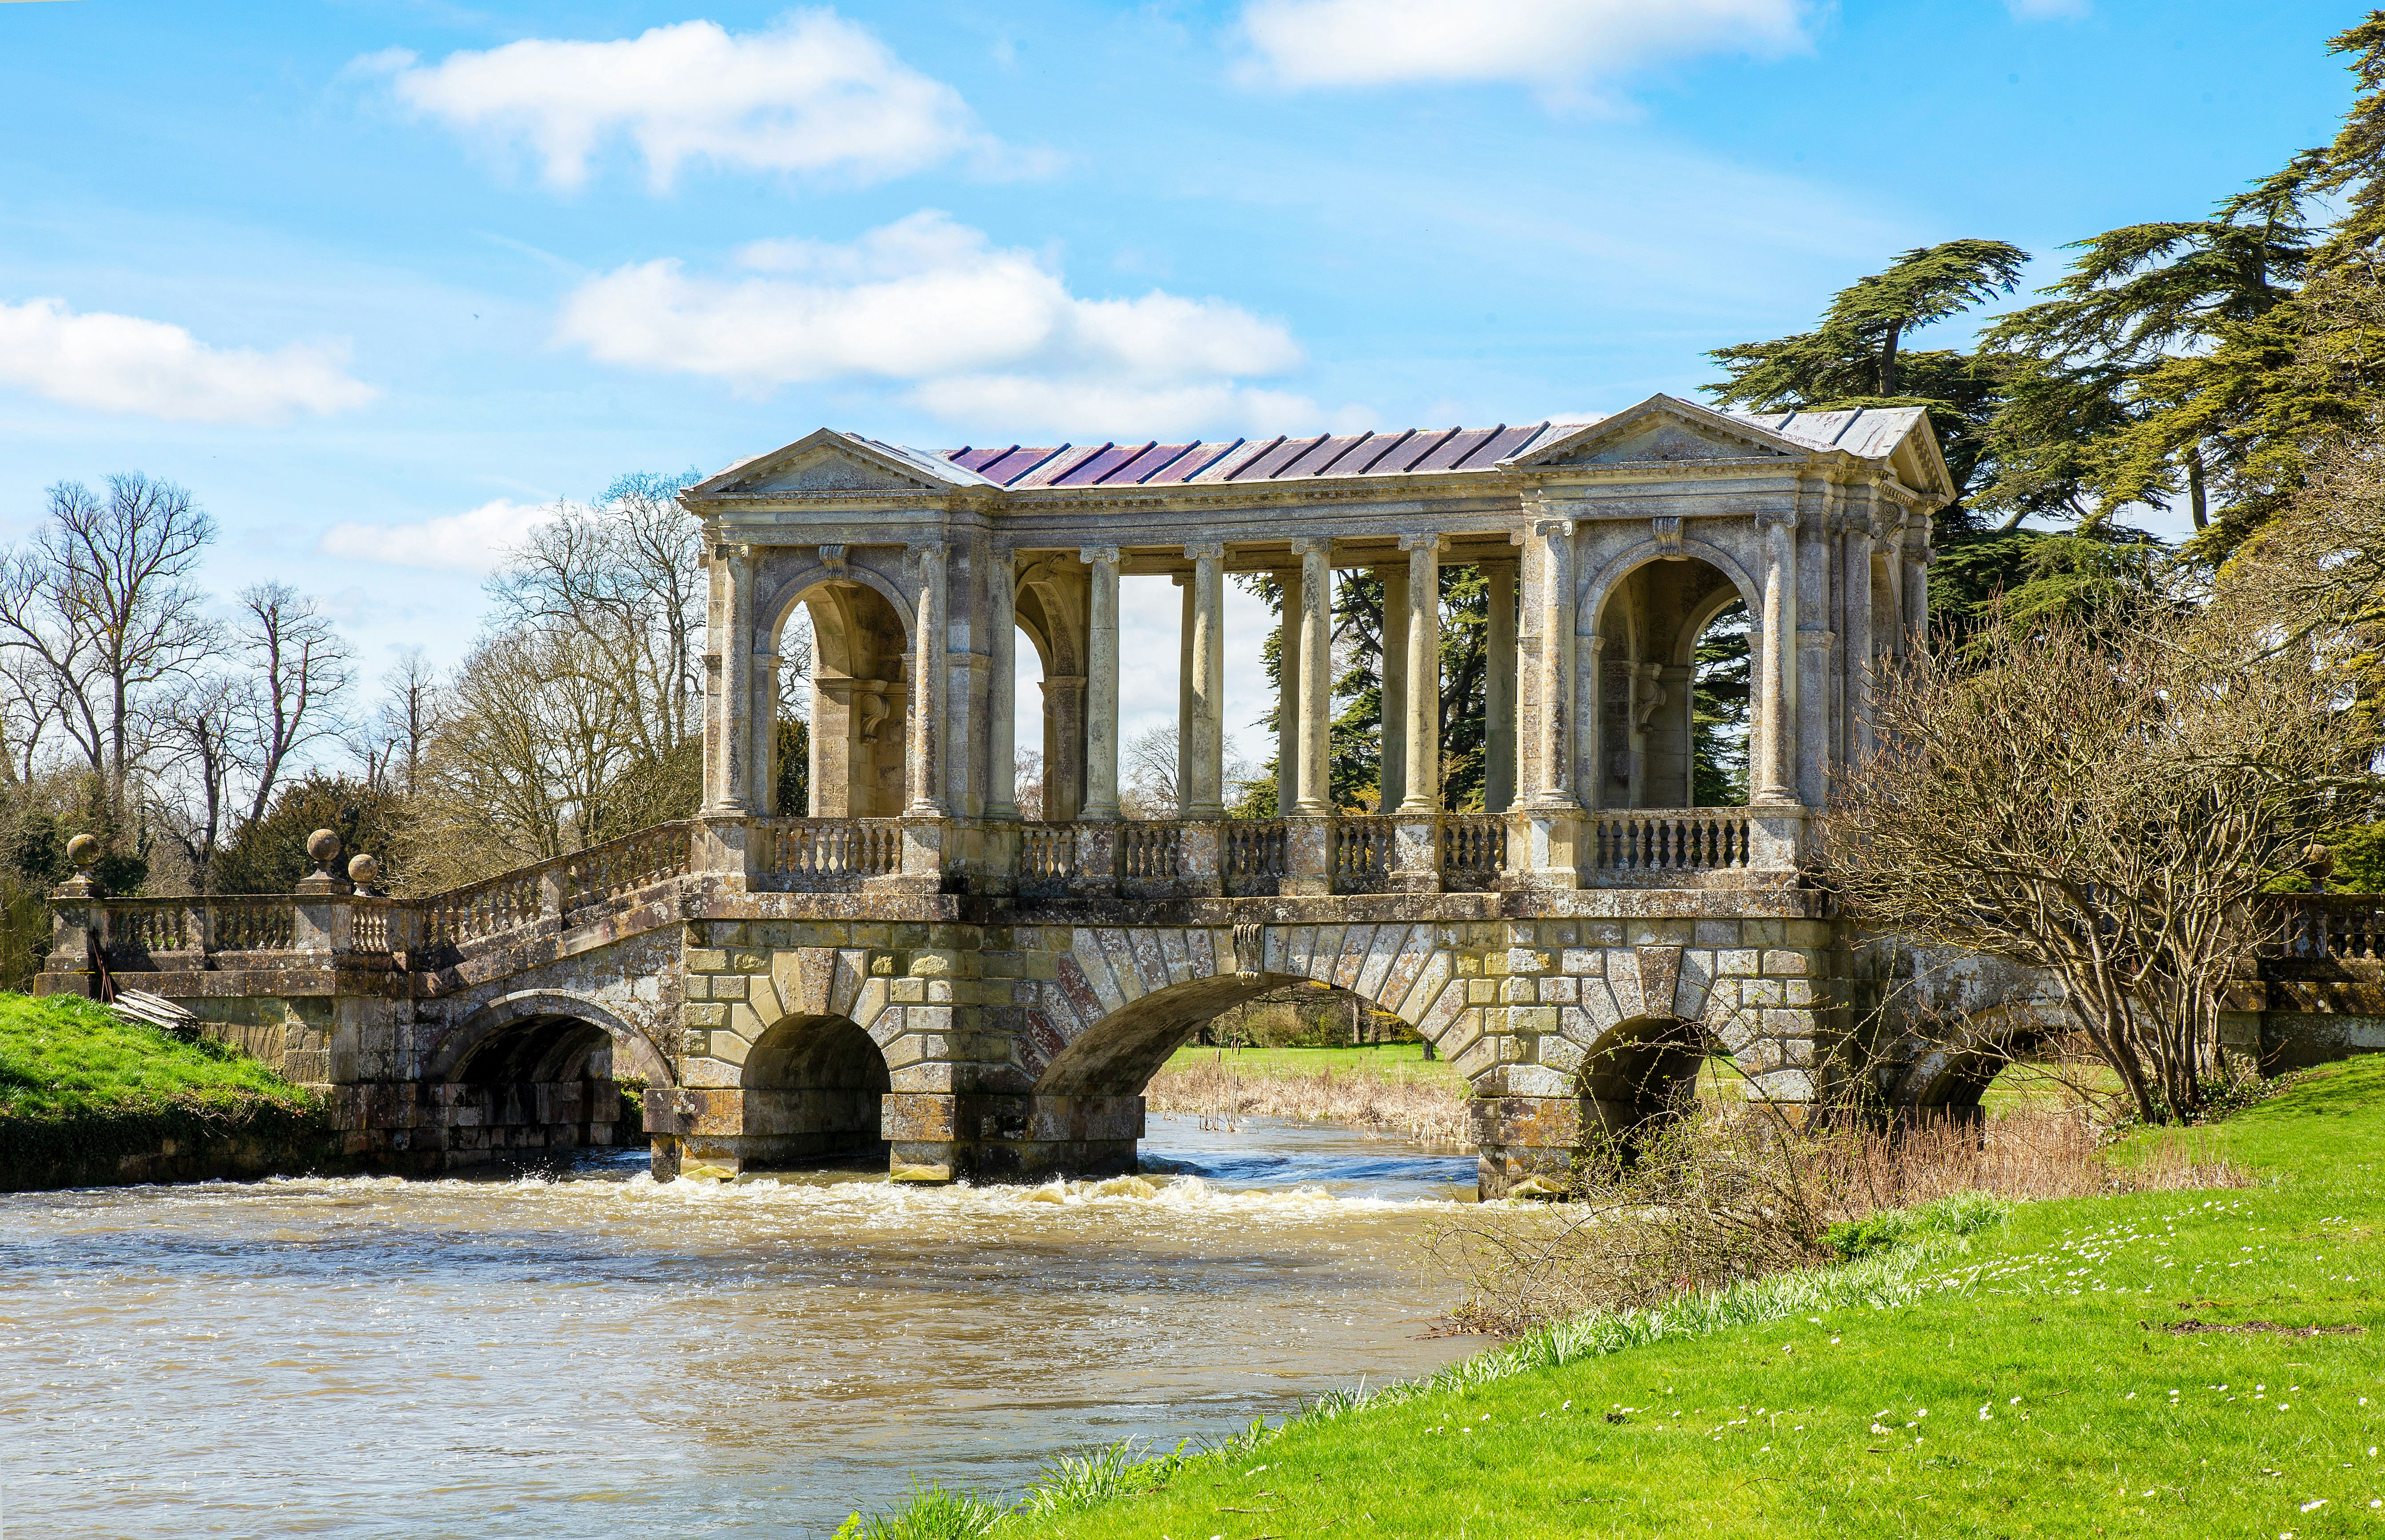 A stream flows beneath the Palladian Bridge at Wilton House. Trees without their leaves are visible in the background.